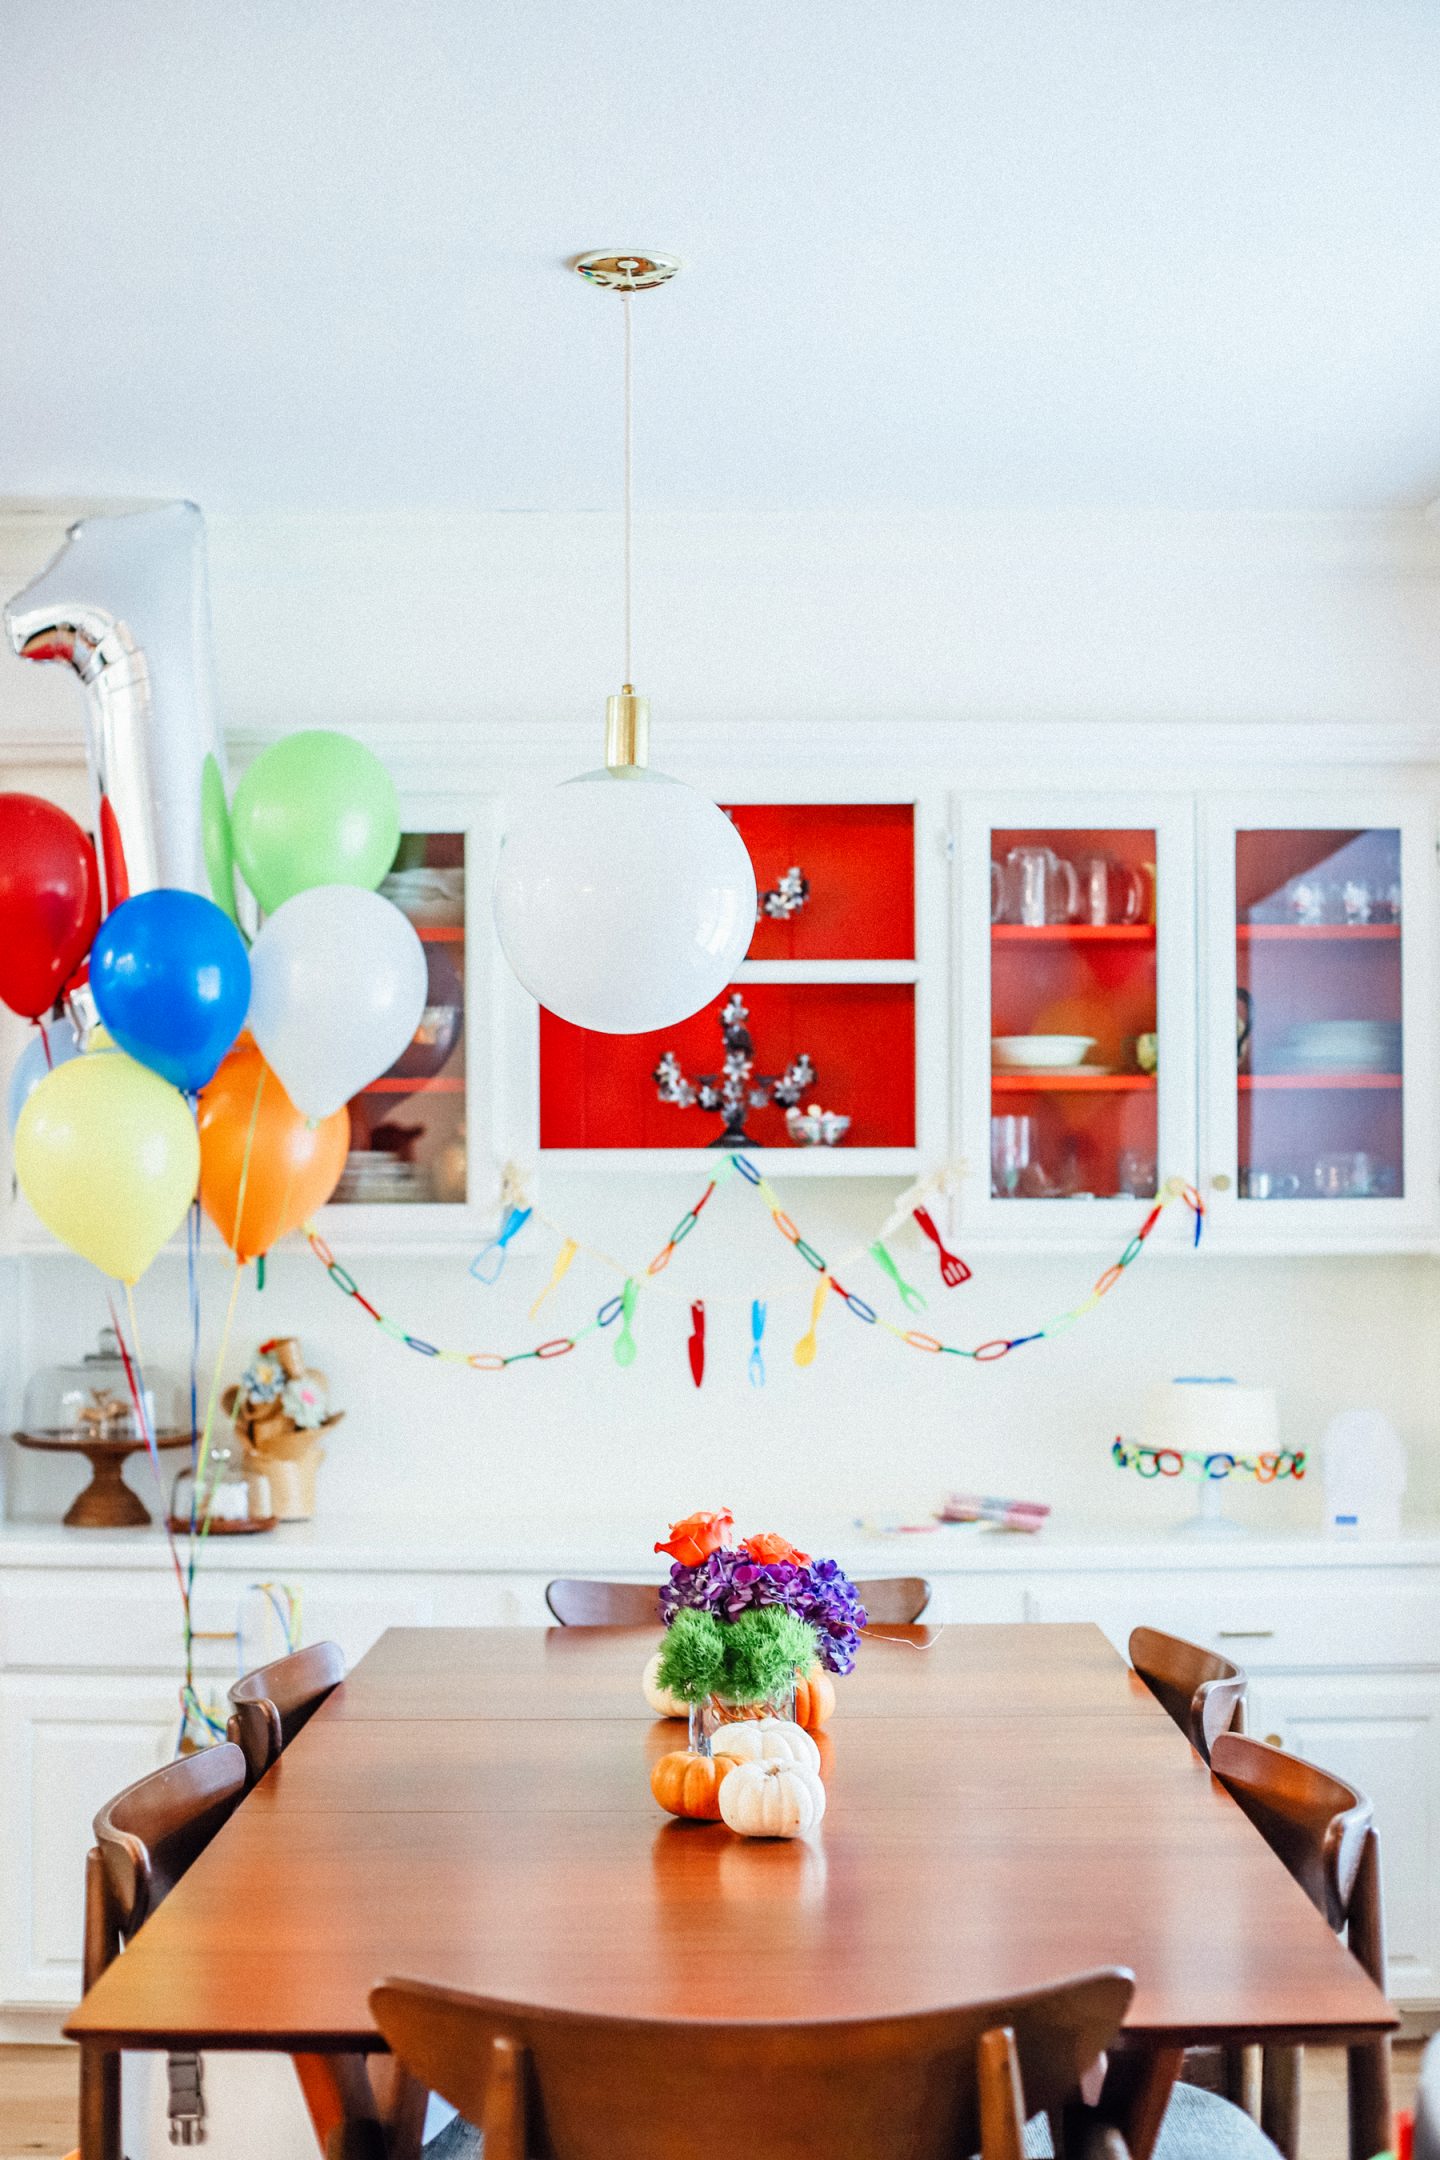 I'm revealing my son's baker themed 1st birthday party! From decorations to the cake, I'm sharing how I kept everything looking good and under budget!